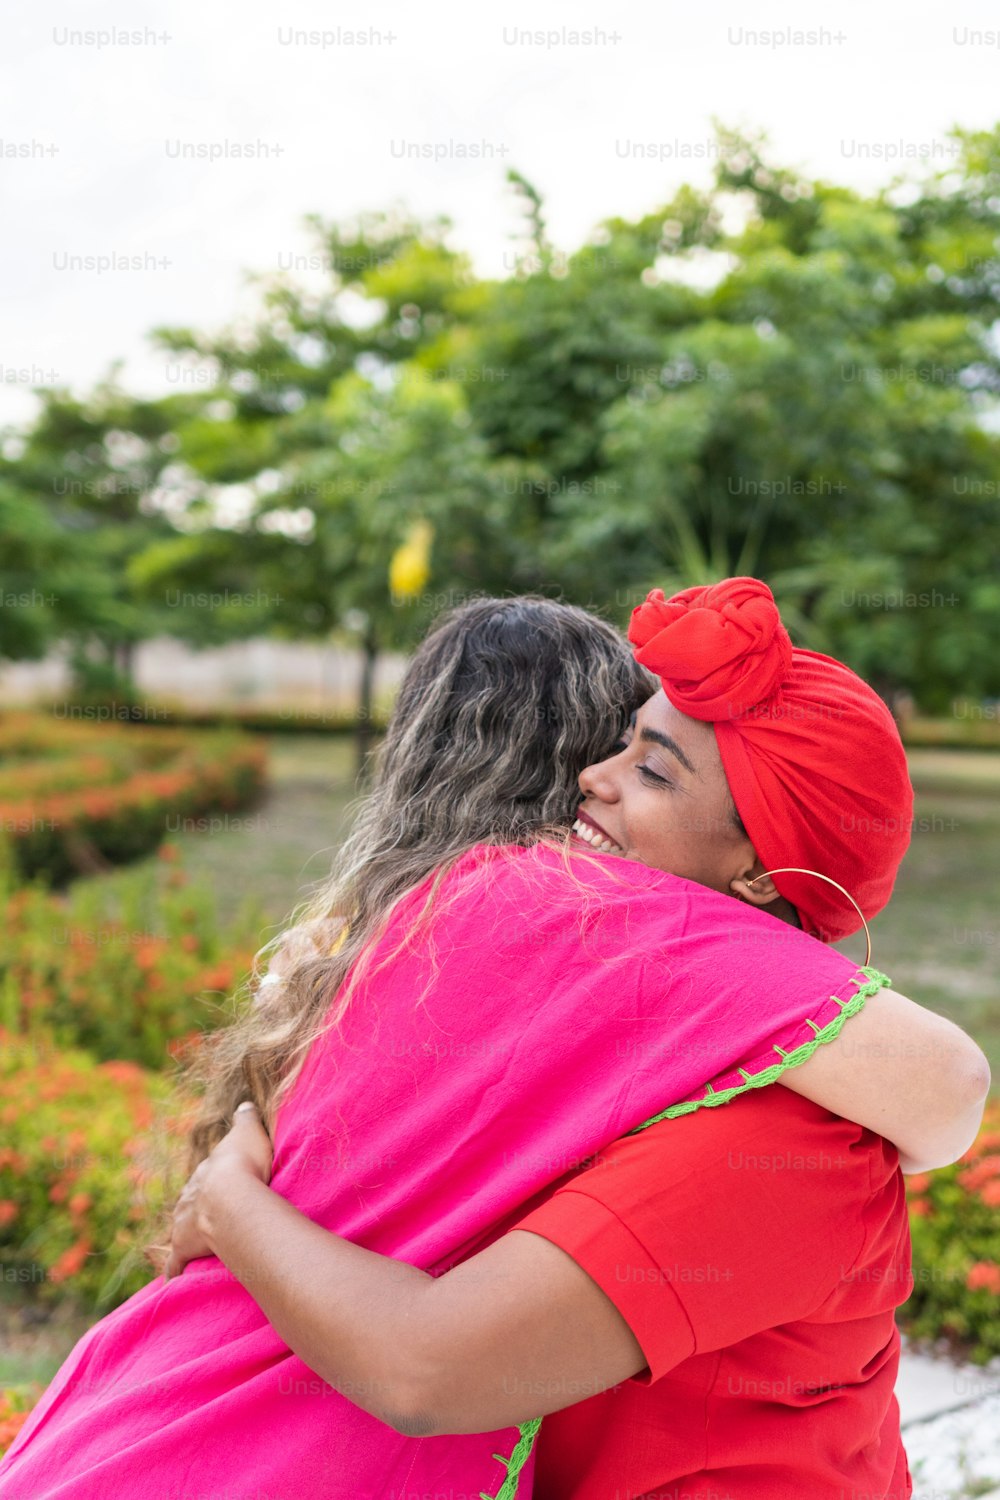 Two Latin women embrace each other in city park